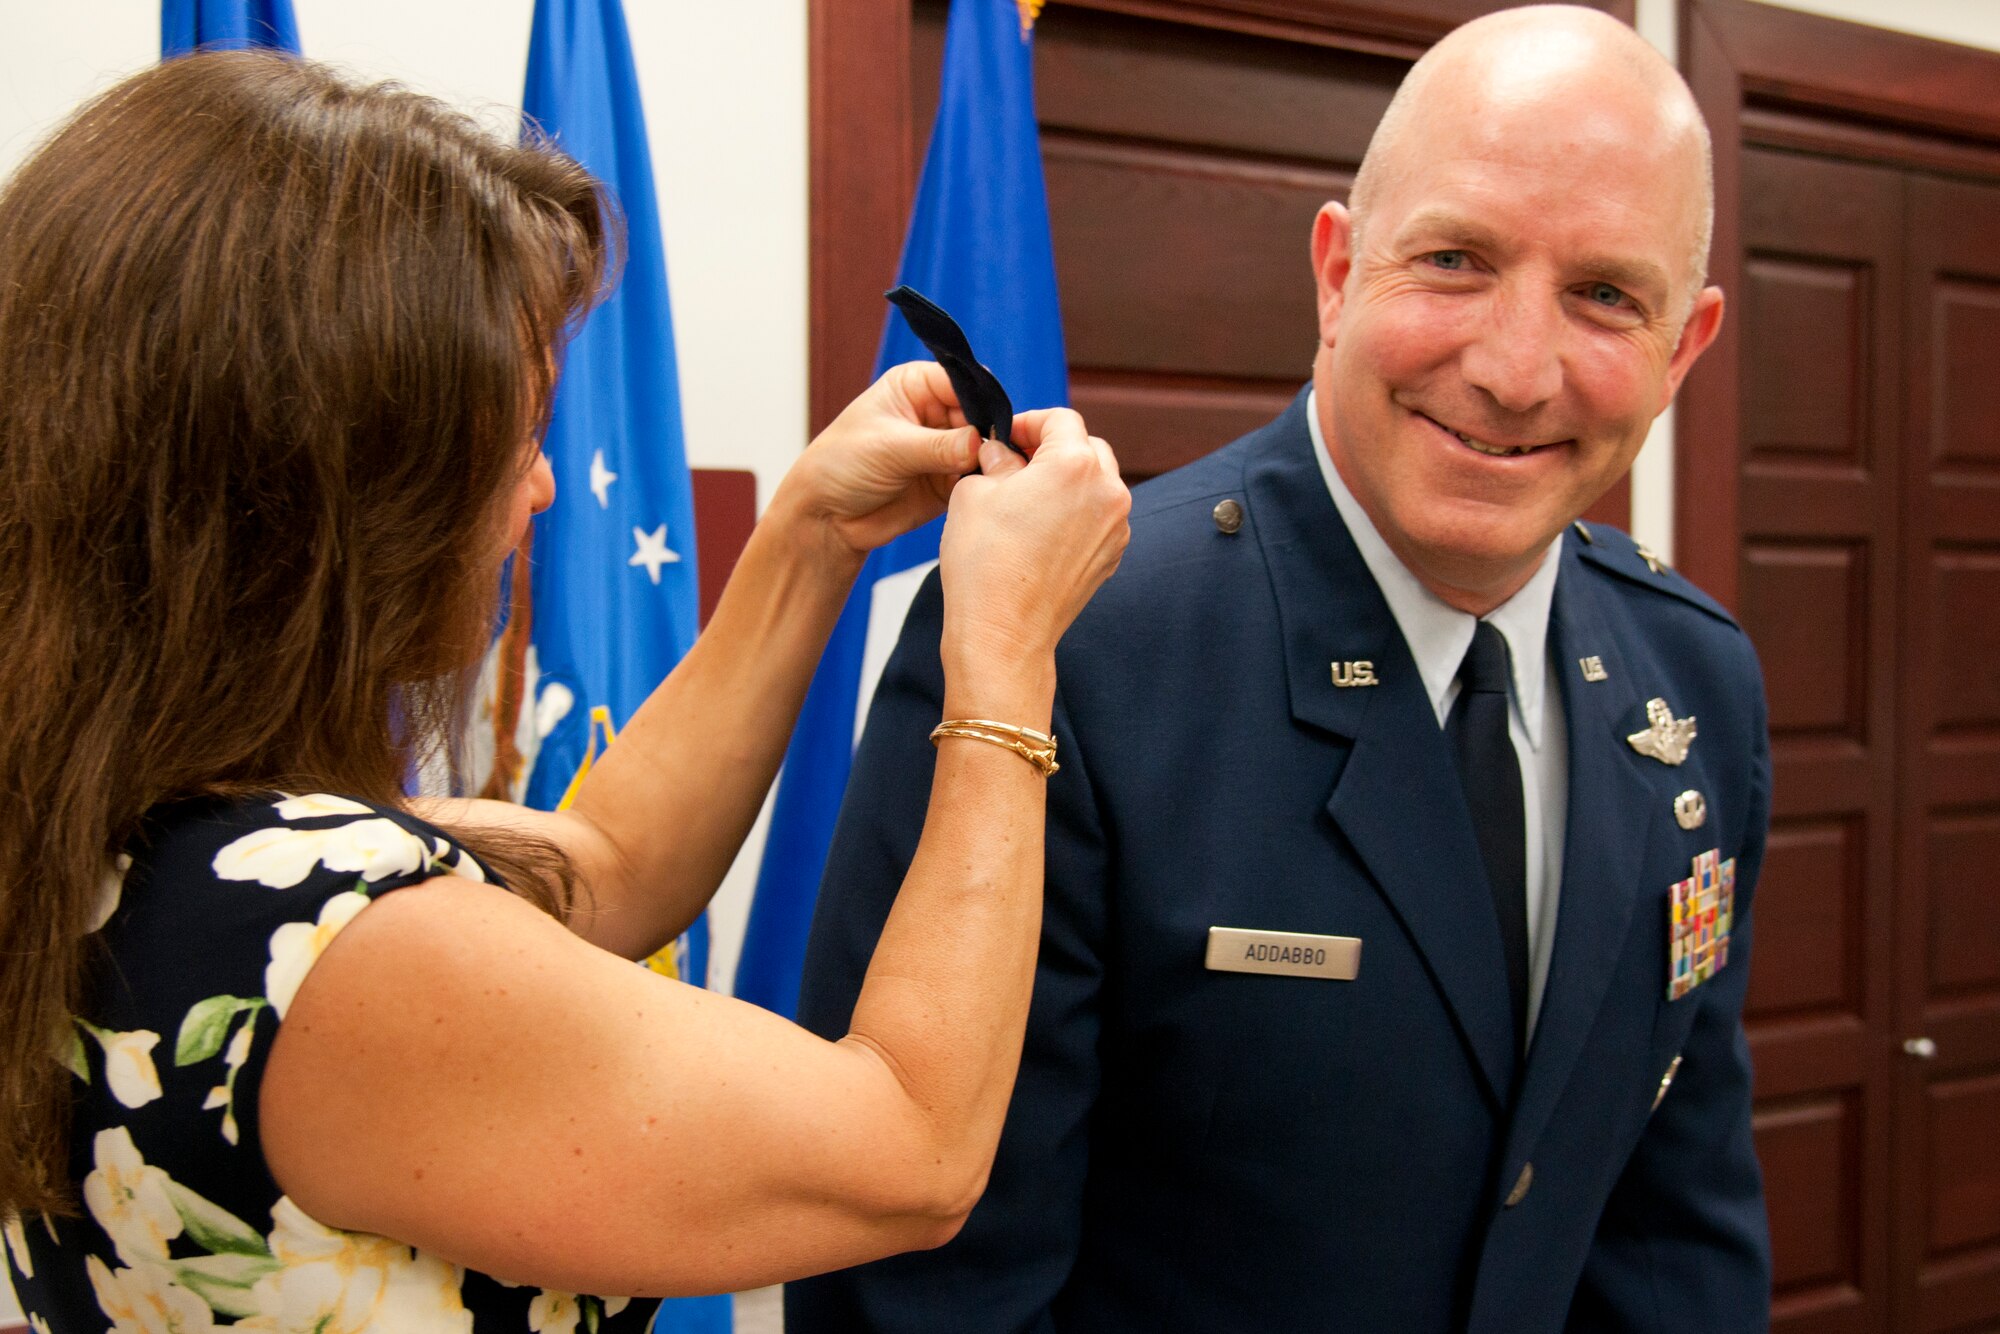 Kris Addabbo pins the brigadier general rank on her husband, Brig. Gen. Vito Addabbo, 20th Air Force and Task Force-214 mobility assistant, during his promotion ceremony May 7, 2015, in 20th AF Headquarters on F.E. Warren Air Force Base, Wyo. Addabbo holds responsibility for assisting the 20th AF commander in the management of the nation’s ICBM force. (U.S. Air Force photo by Airman 1st Class Malcolm Mayfield)